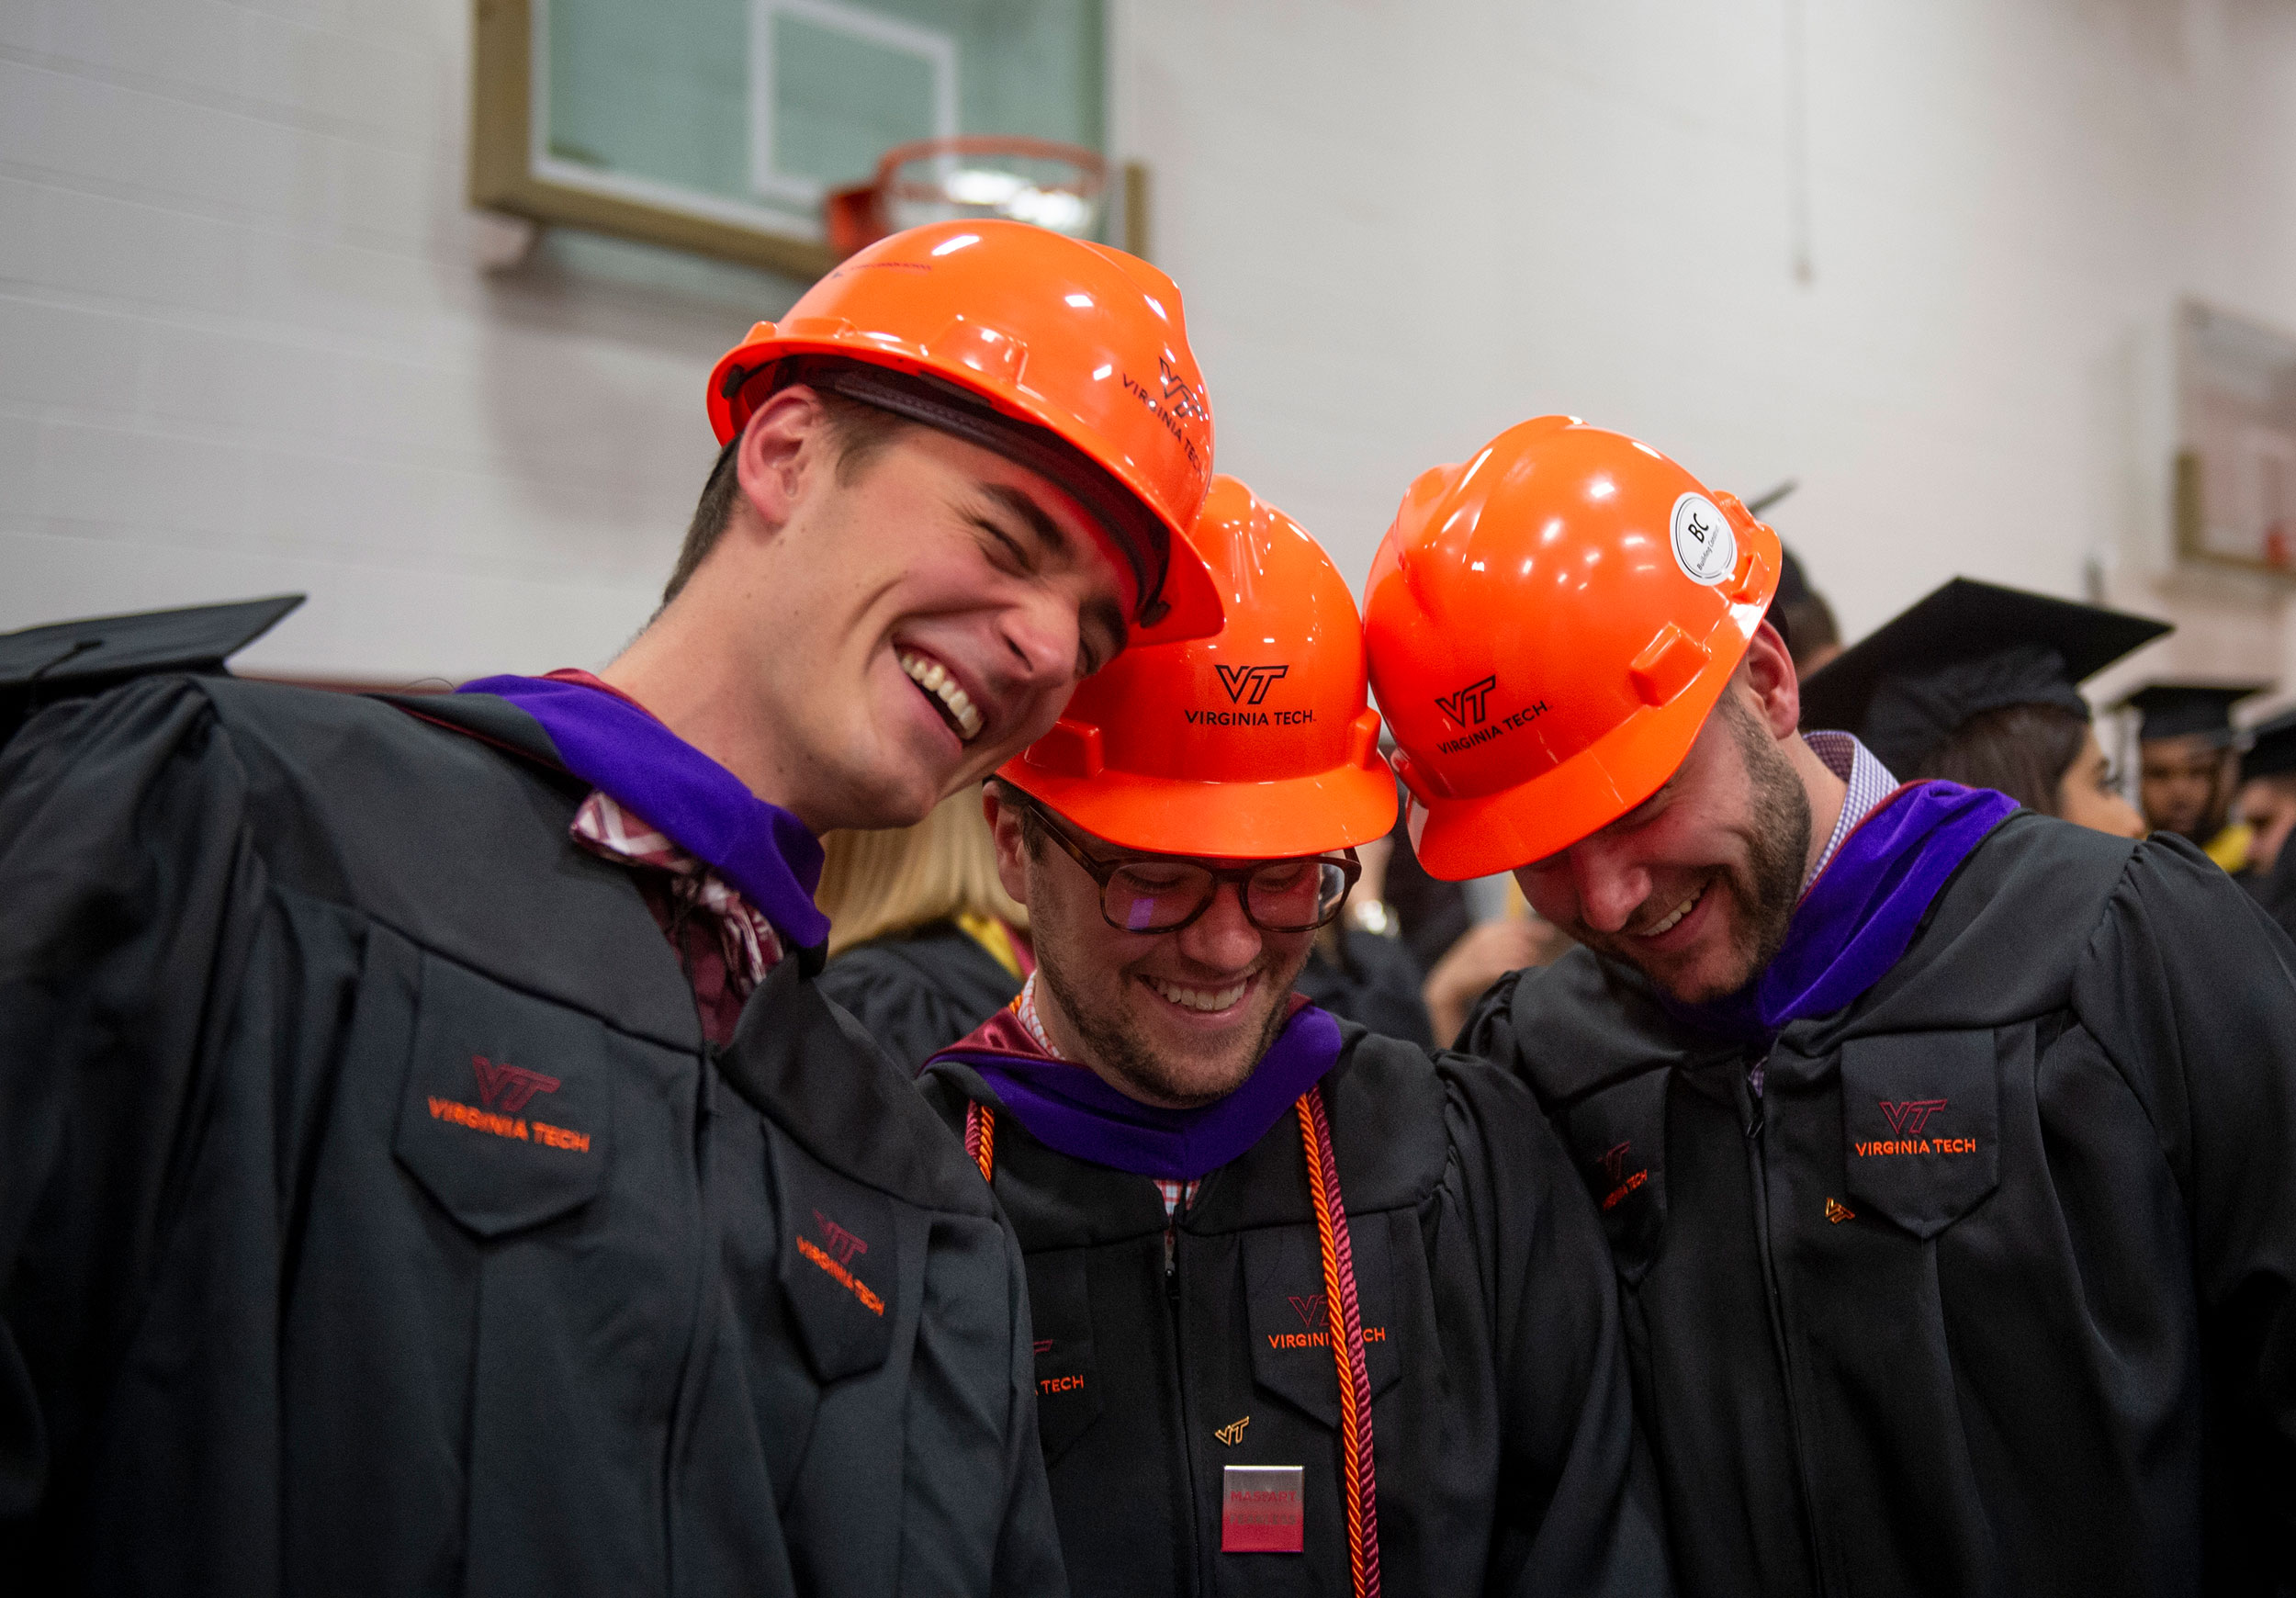 Graduates from the Myers-Lawson School of Construction don orange hard hats in lieu of the traditional cap.